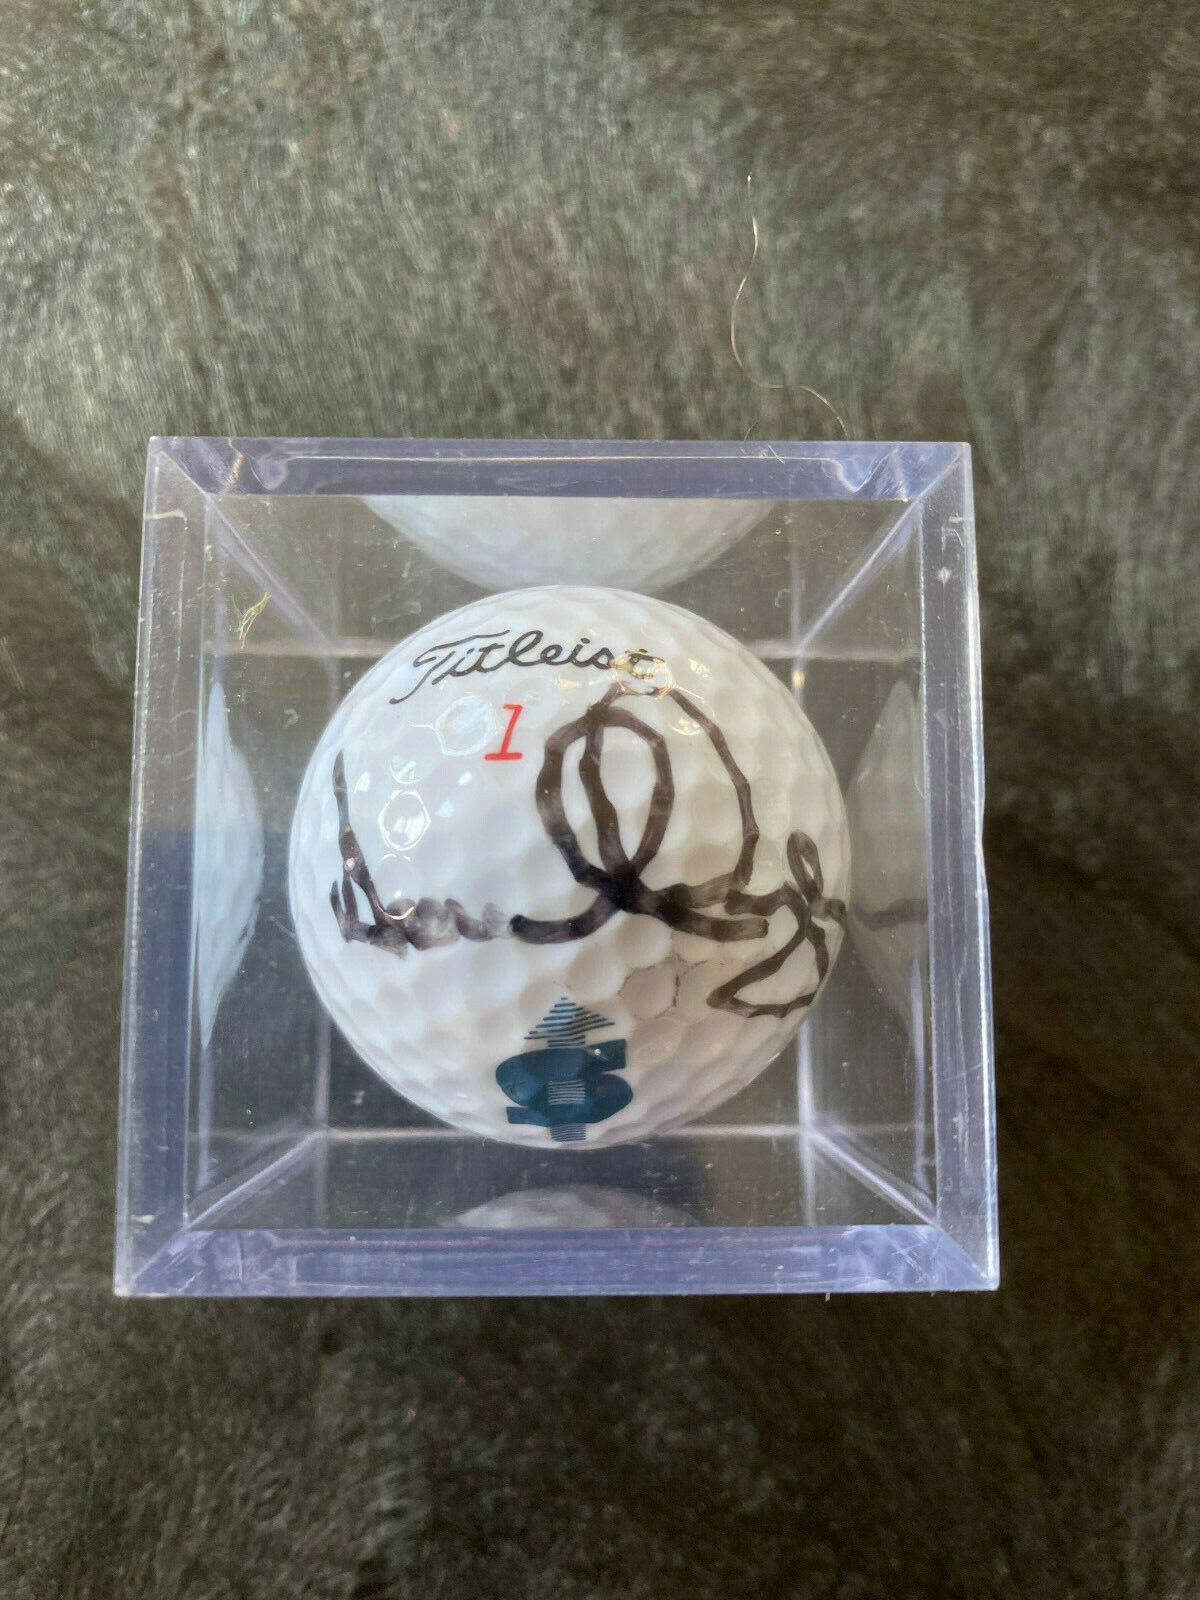 Dana Quigley Autographed / Hand Signed Titleist Golf Ball - In Person- In Cube